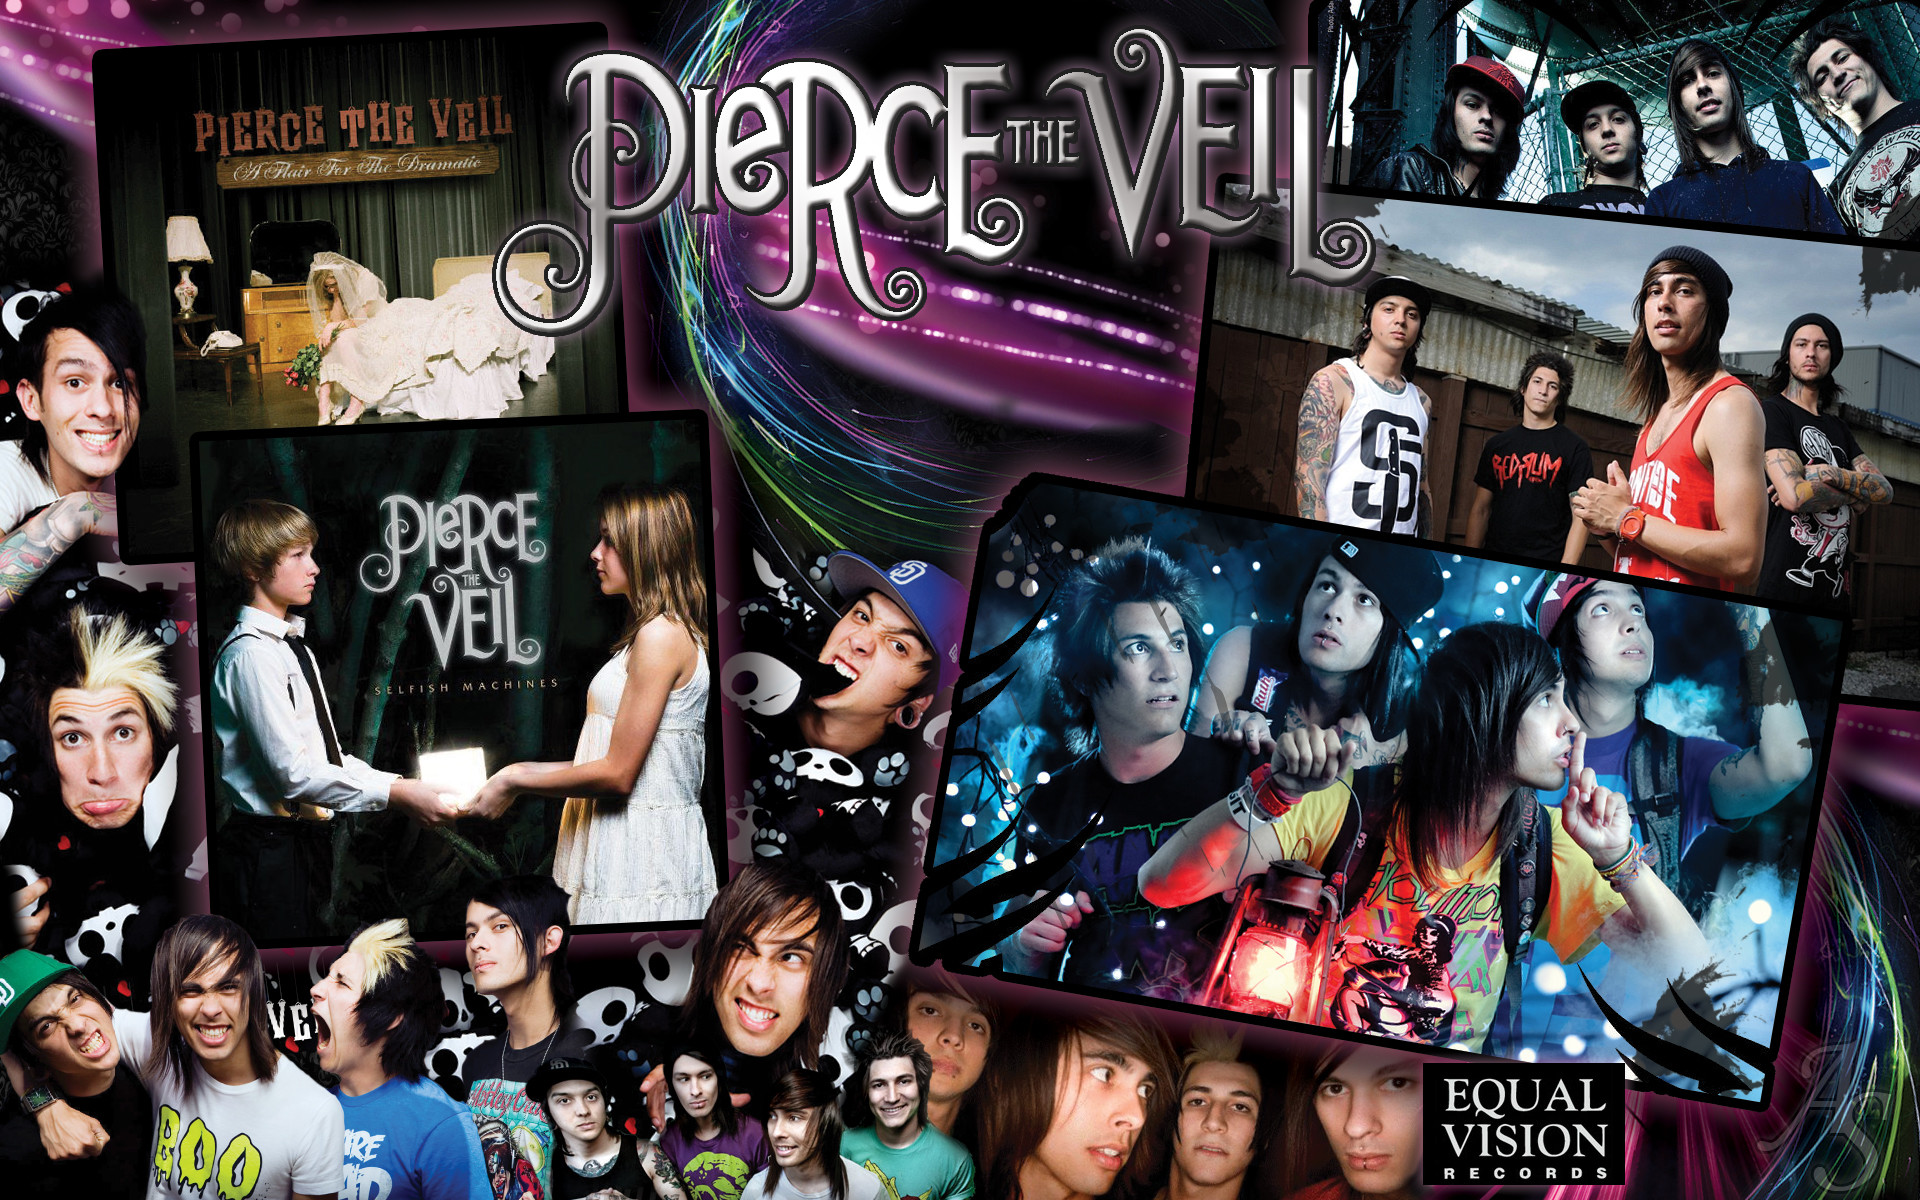 1920x1200 Free Pictures Pierce The Veil Wallpapers HD.